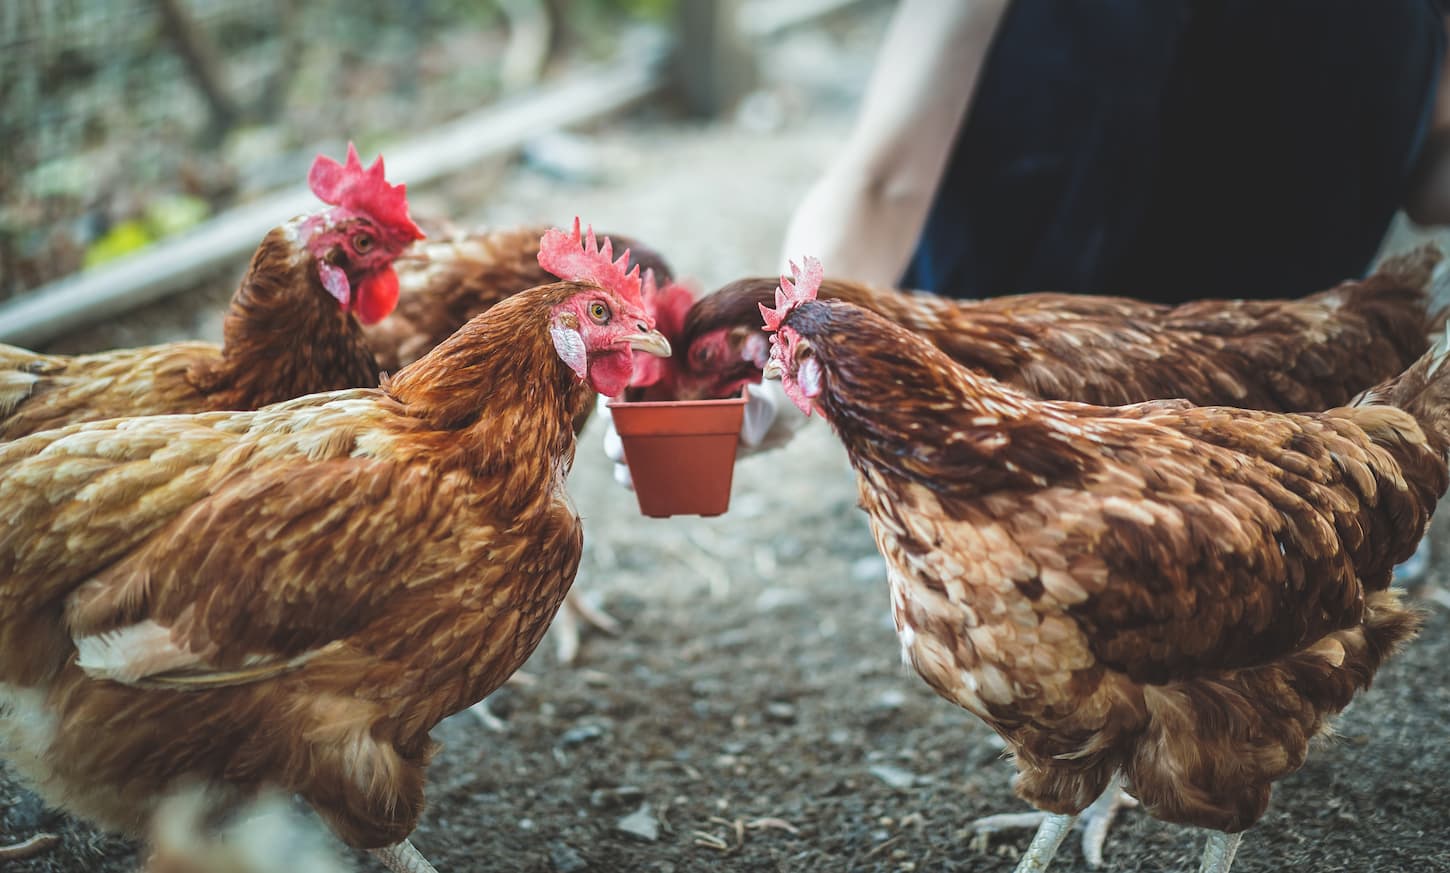 Can You Overfeed Chickens?